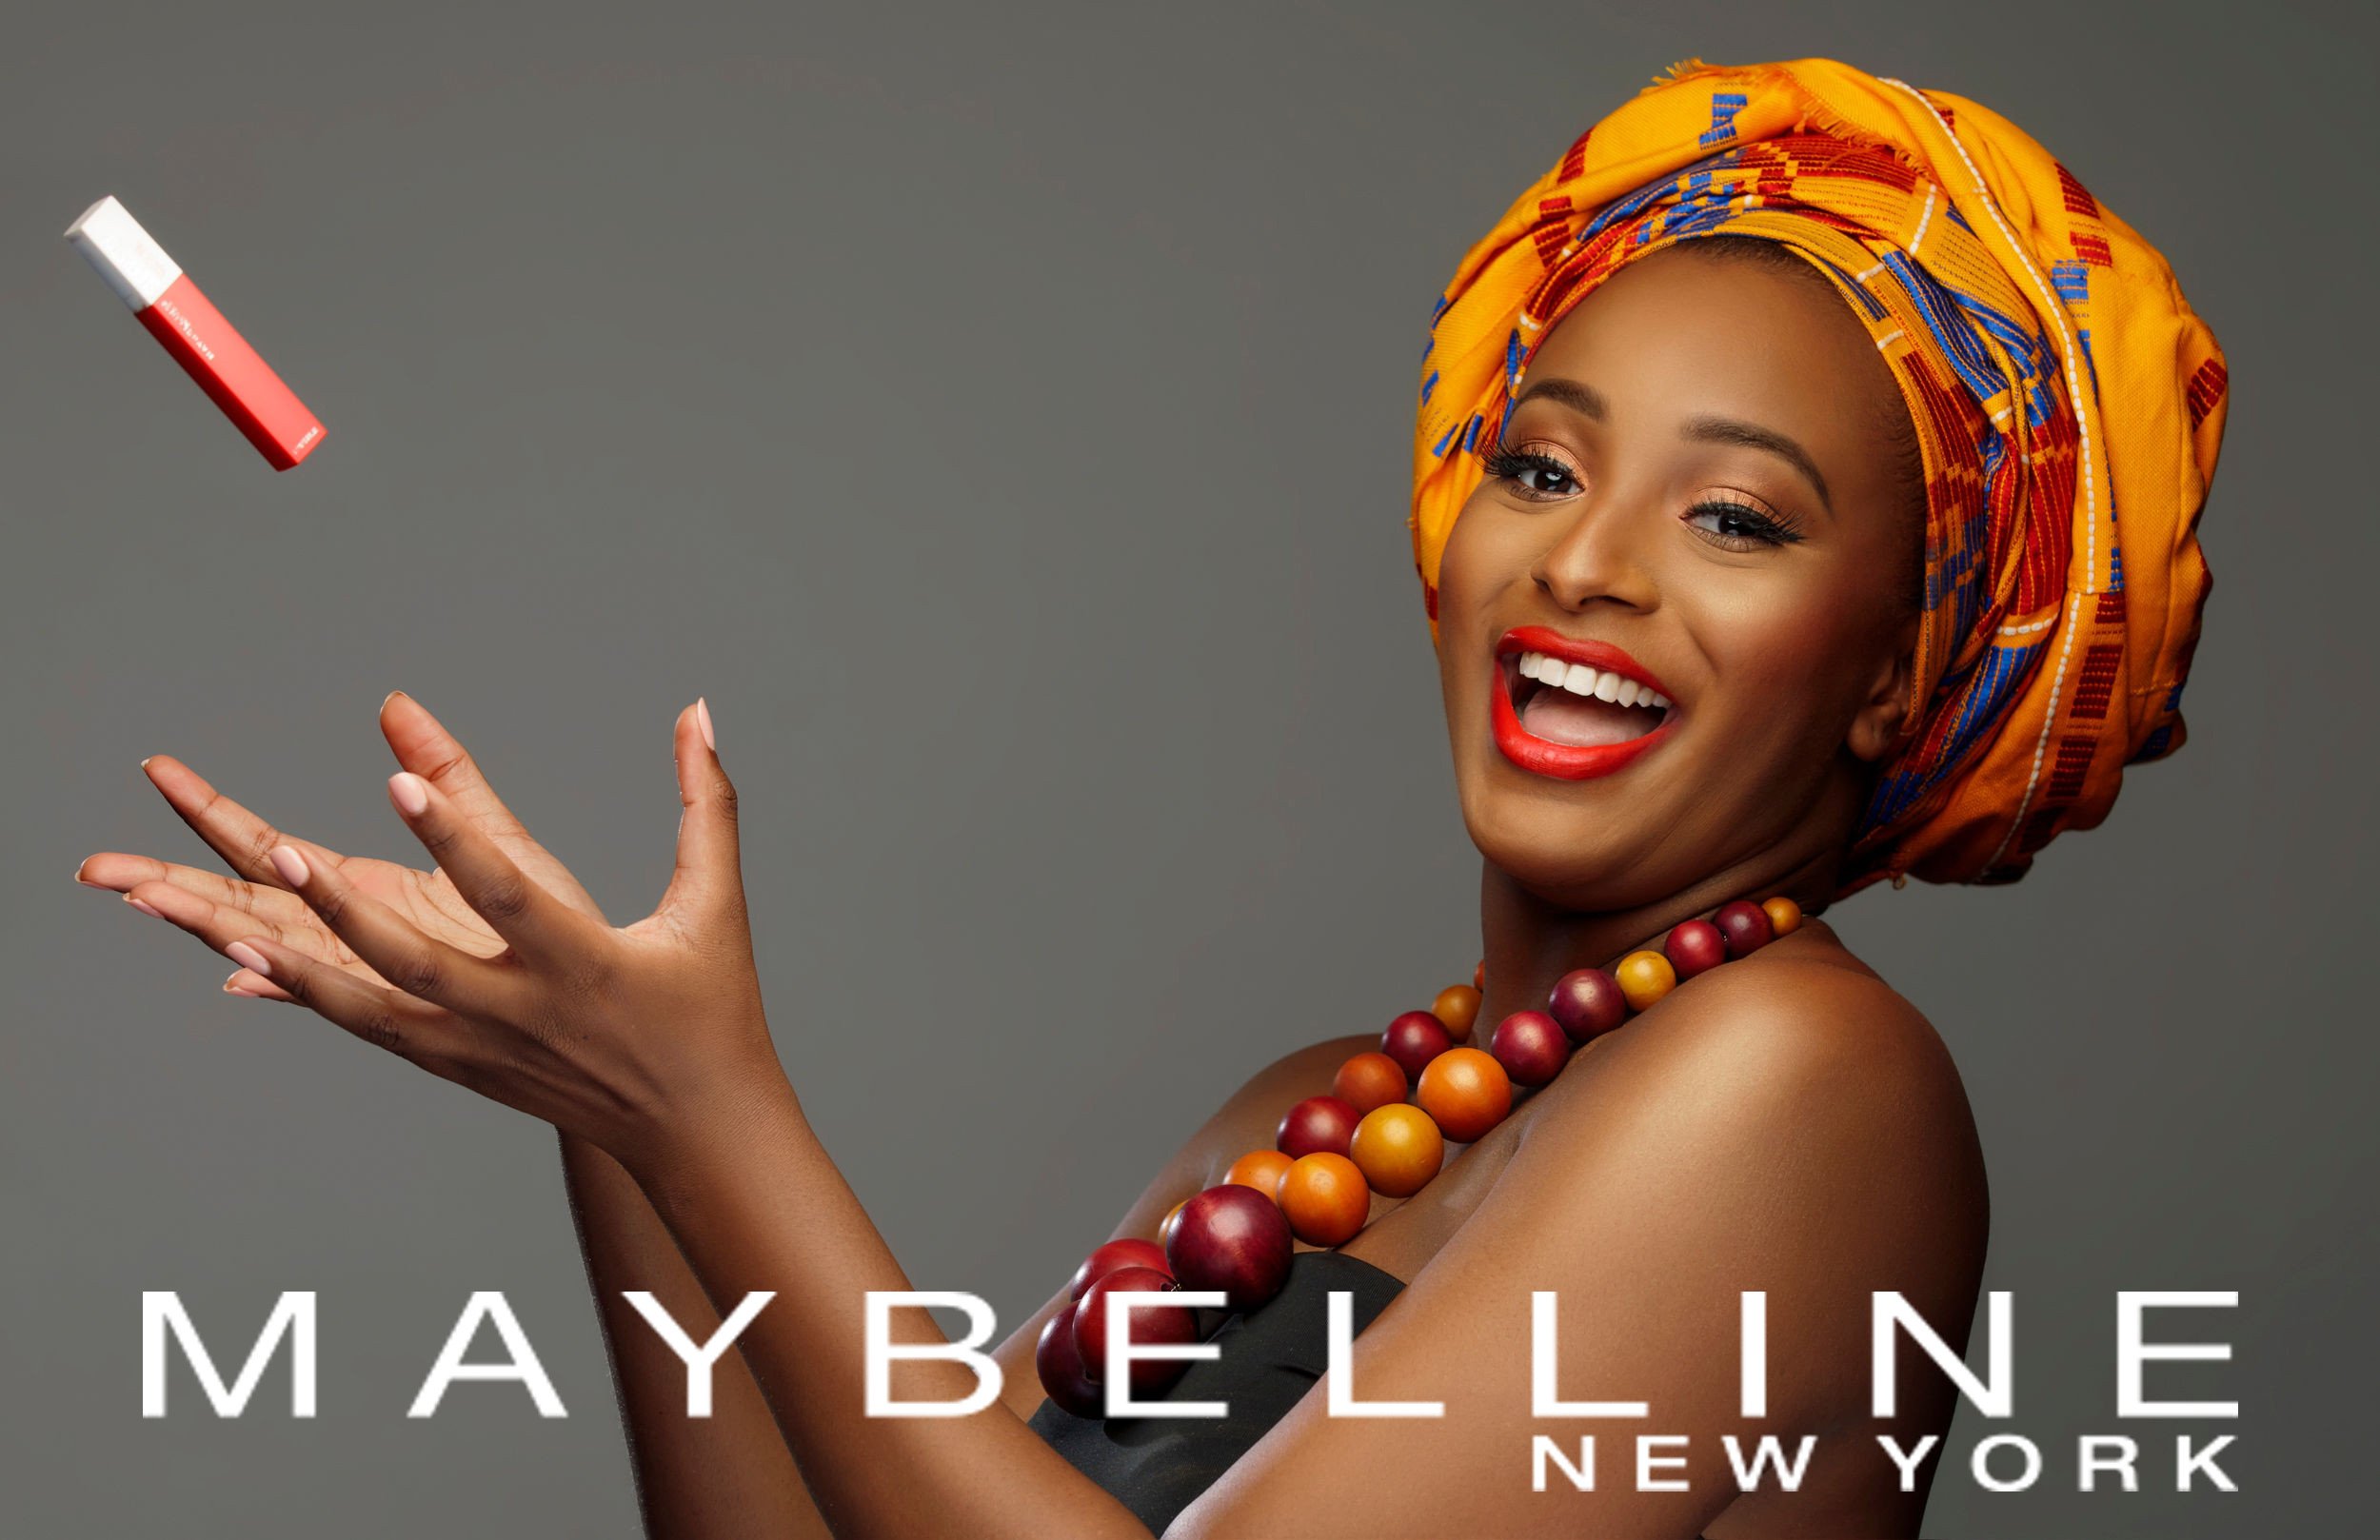 DJ Cuppy becomes the new face of Maybelline “IT GIRL” cosmetics